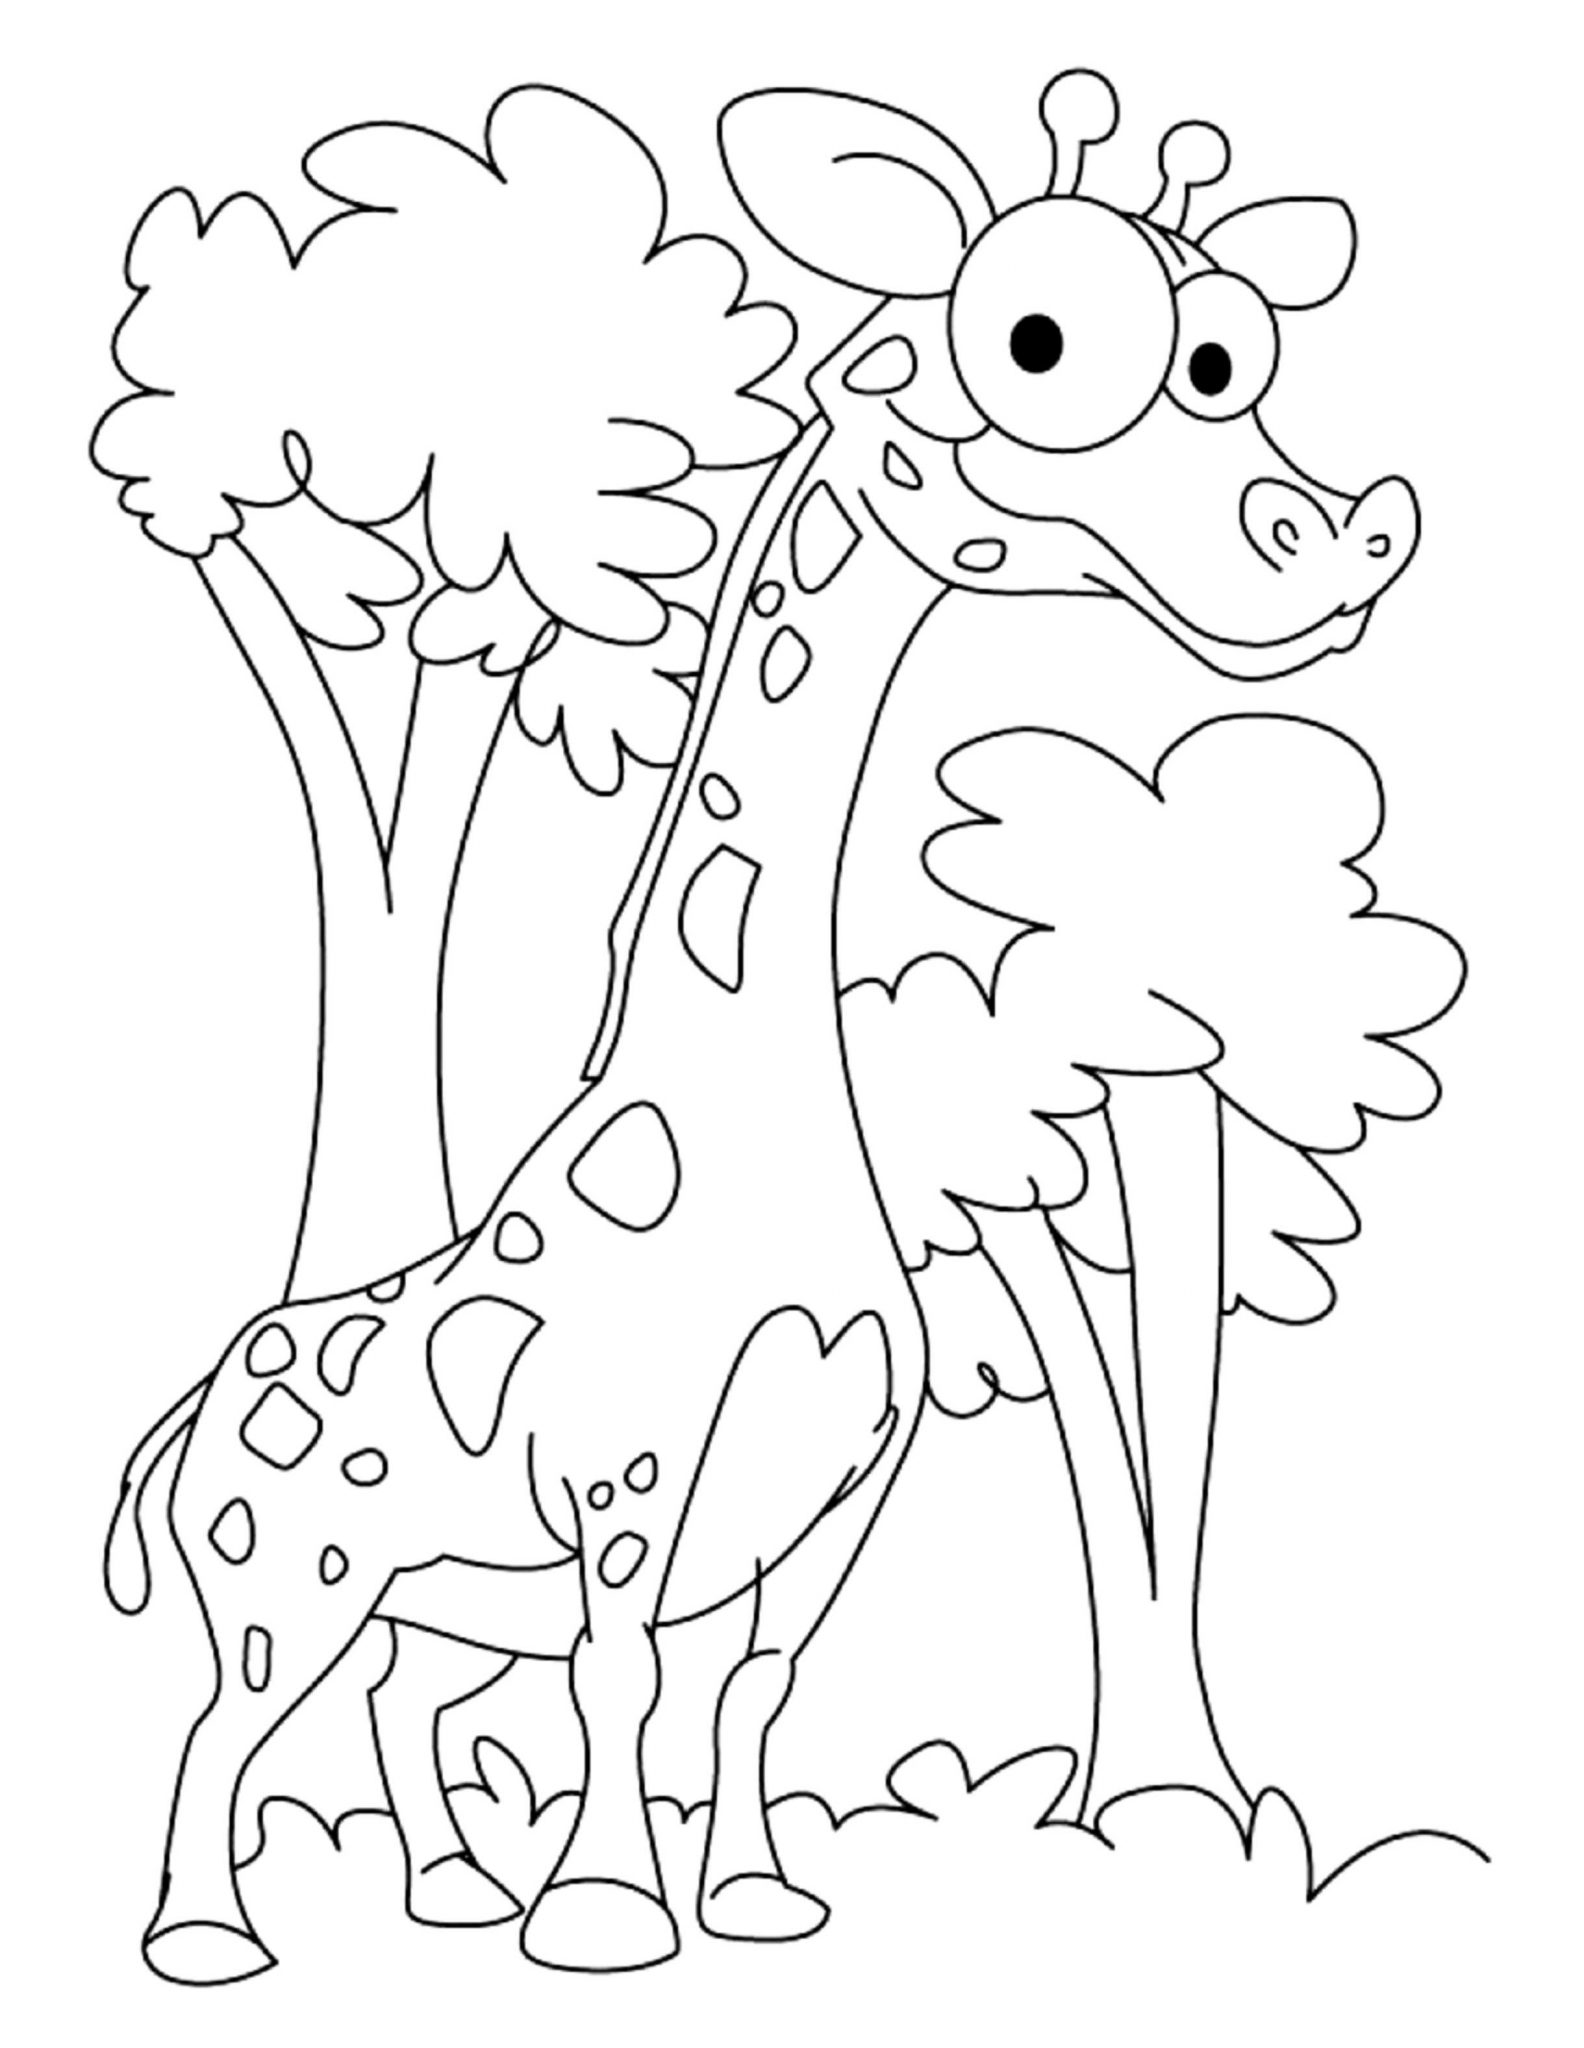 Download Print & Download - Giraffe Coloring Pages for Kids to Have Fun